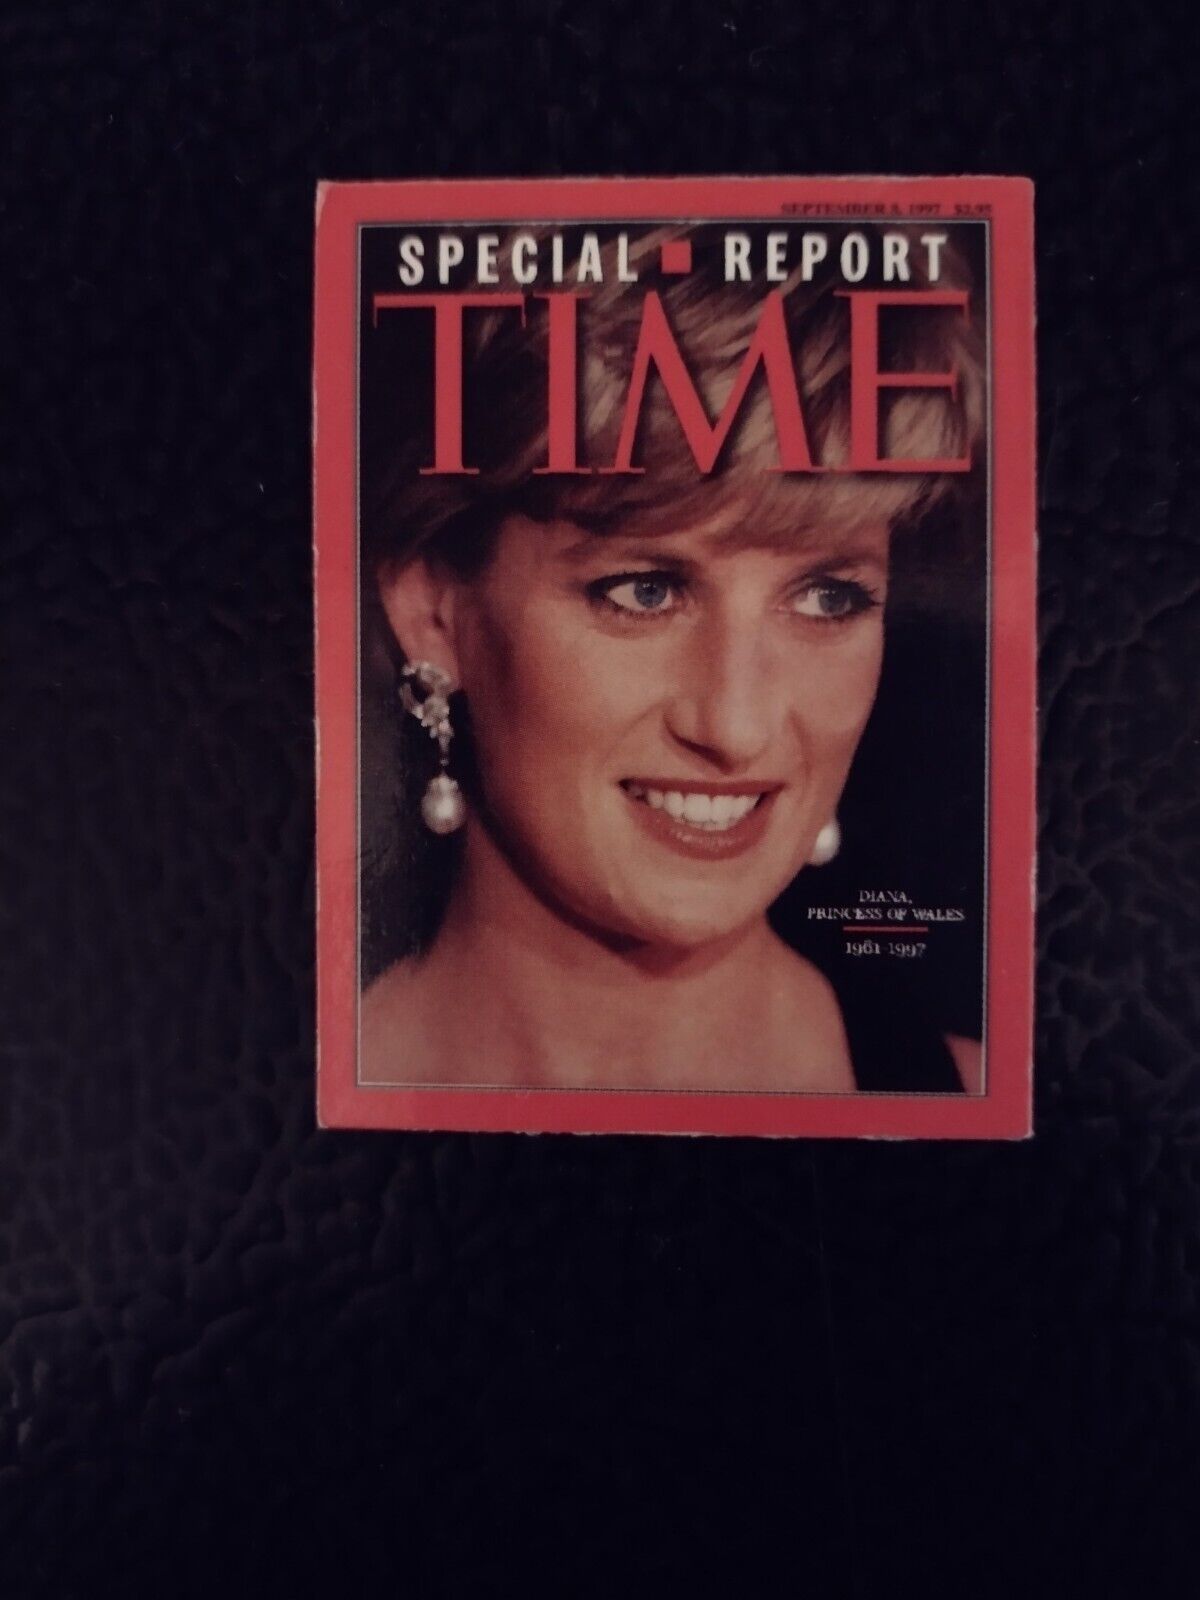 Princess Diana Time Magazine Special Report Magnet. Size 1-7/8 in. by 2-1/2 in. 